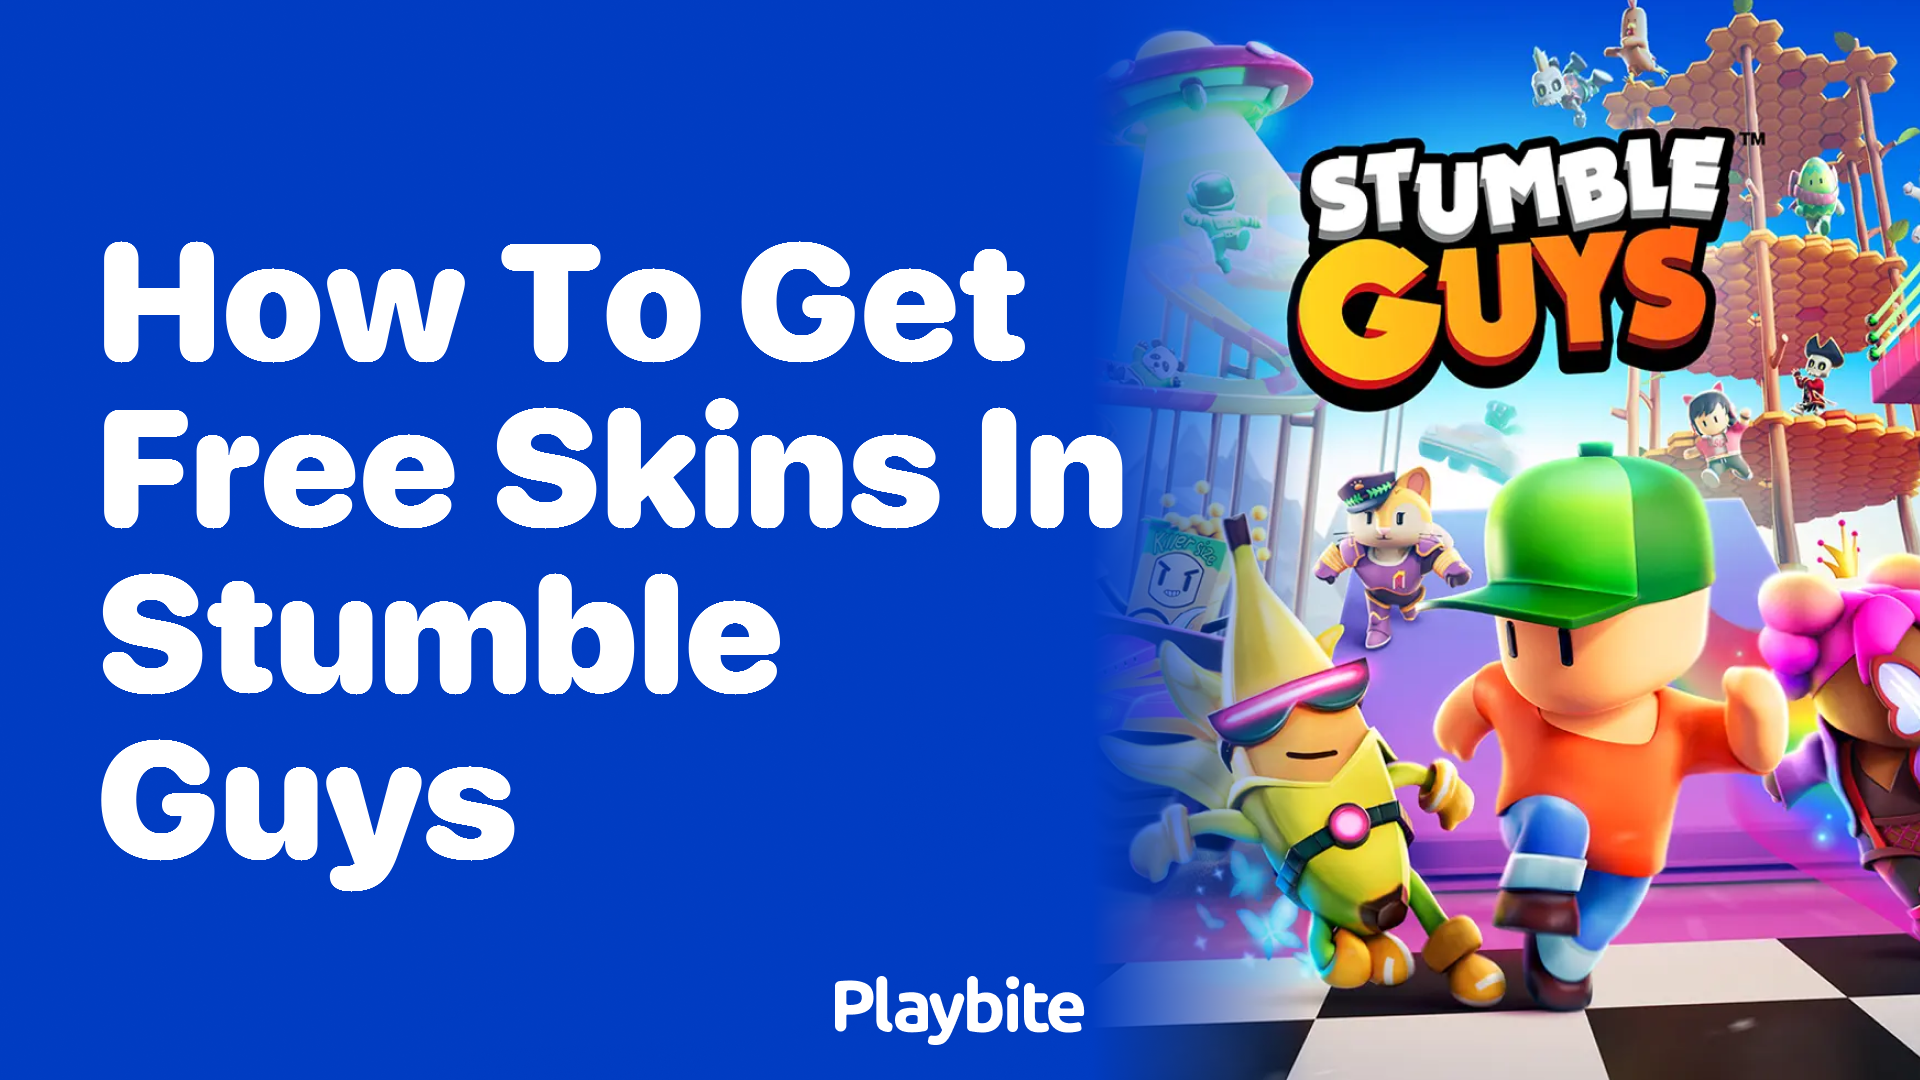 How to Get Free Skins in Stumble Guys